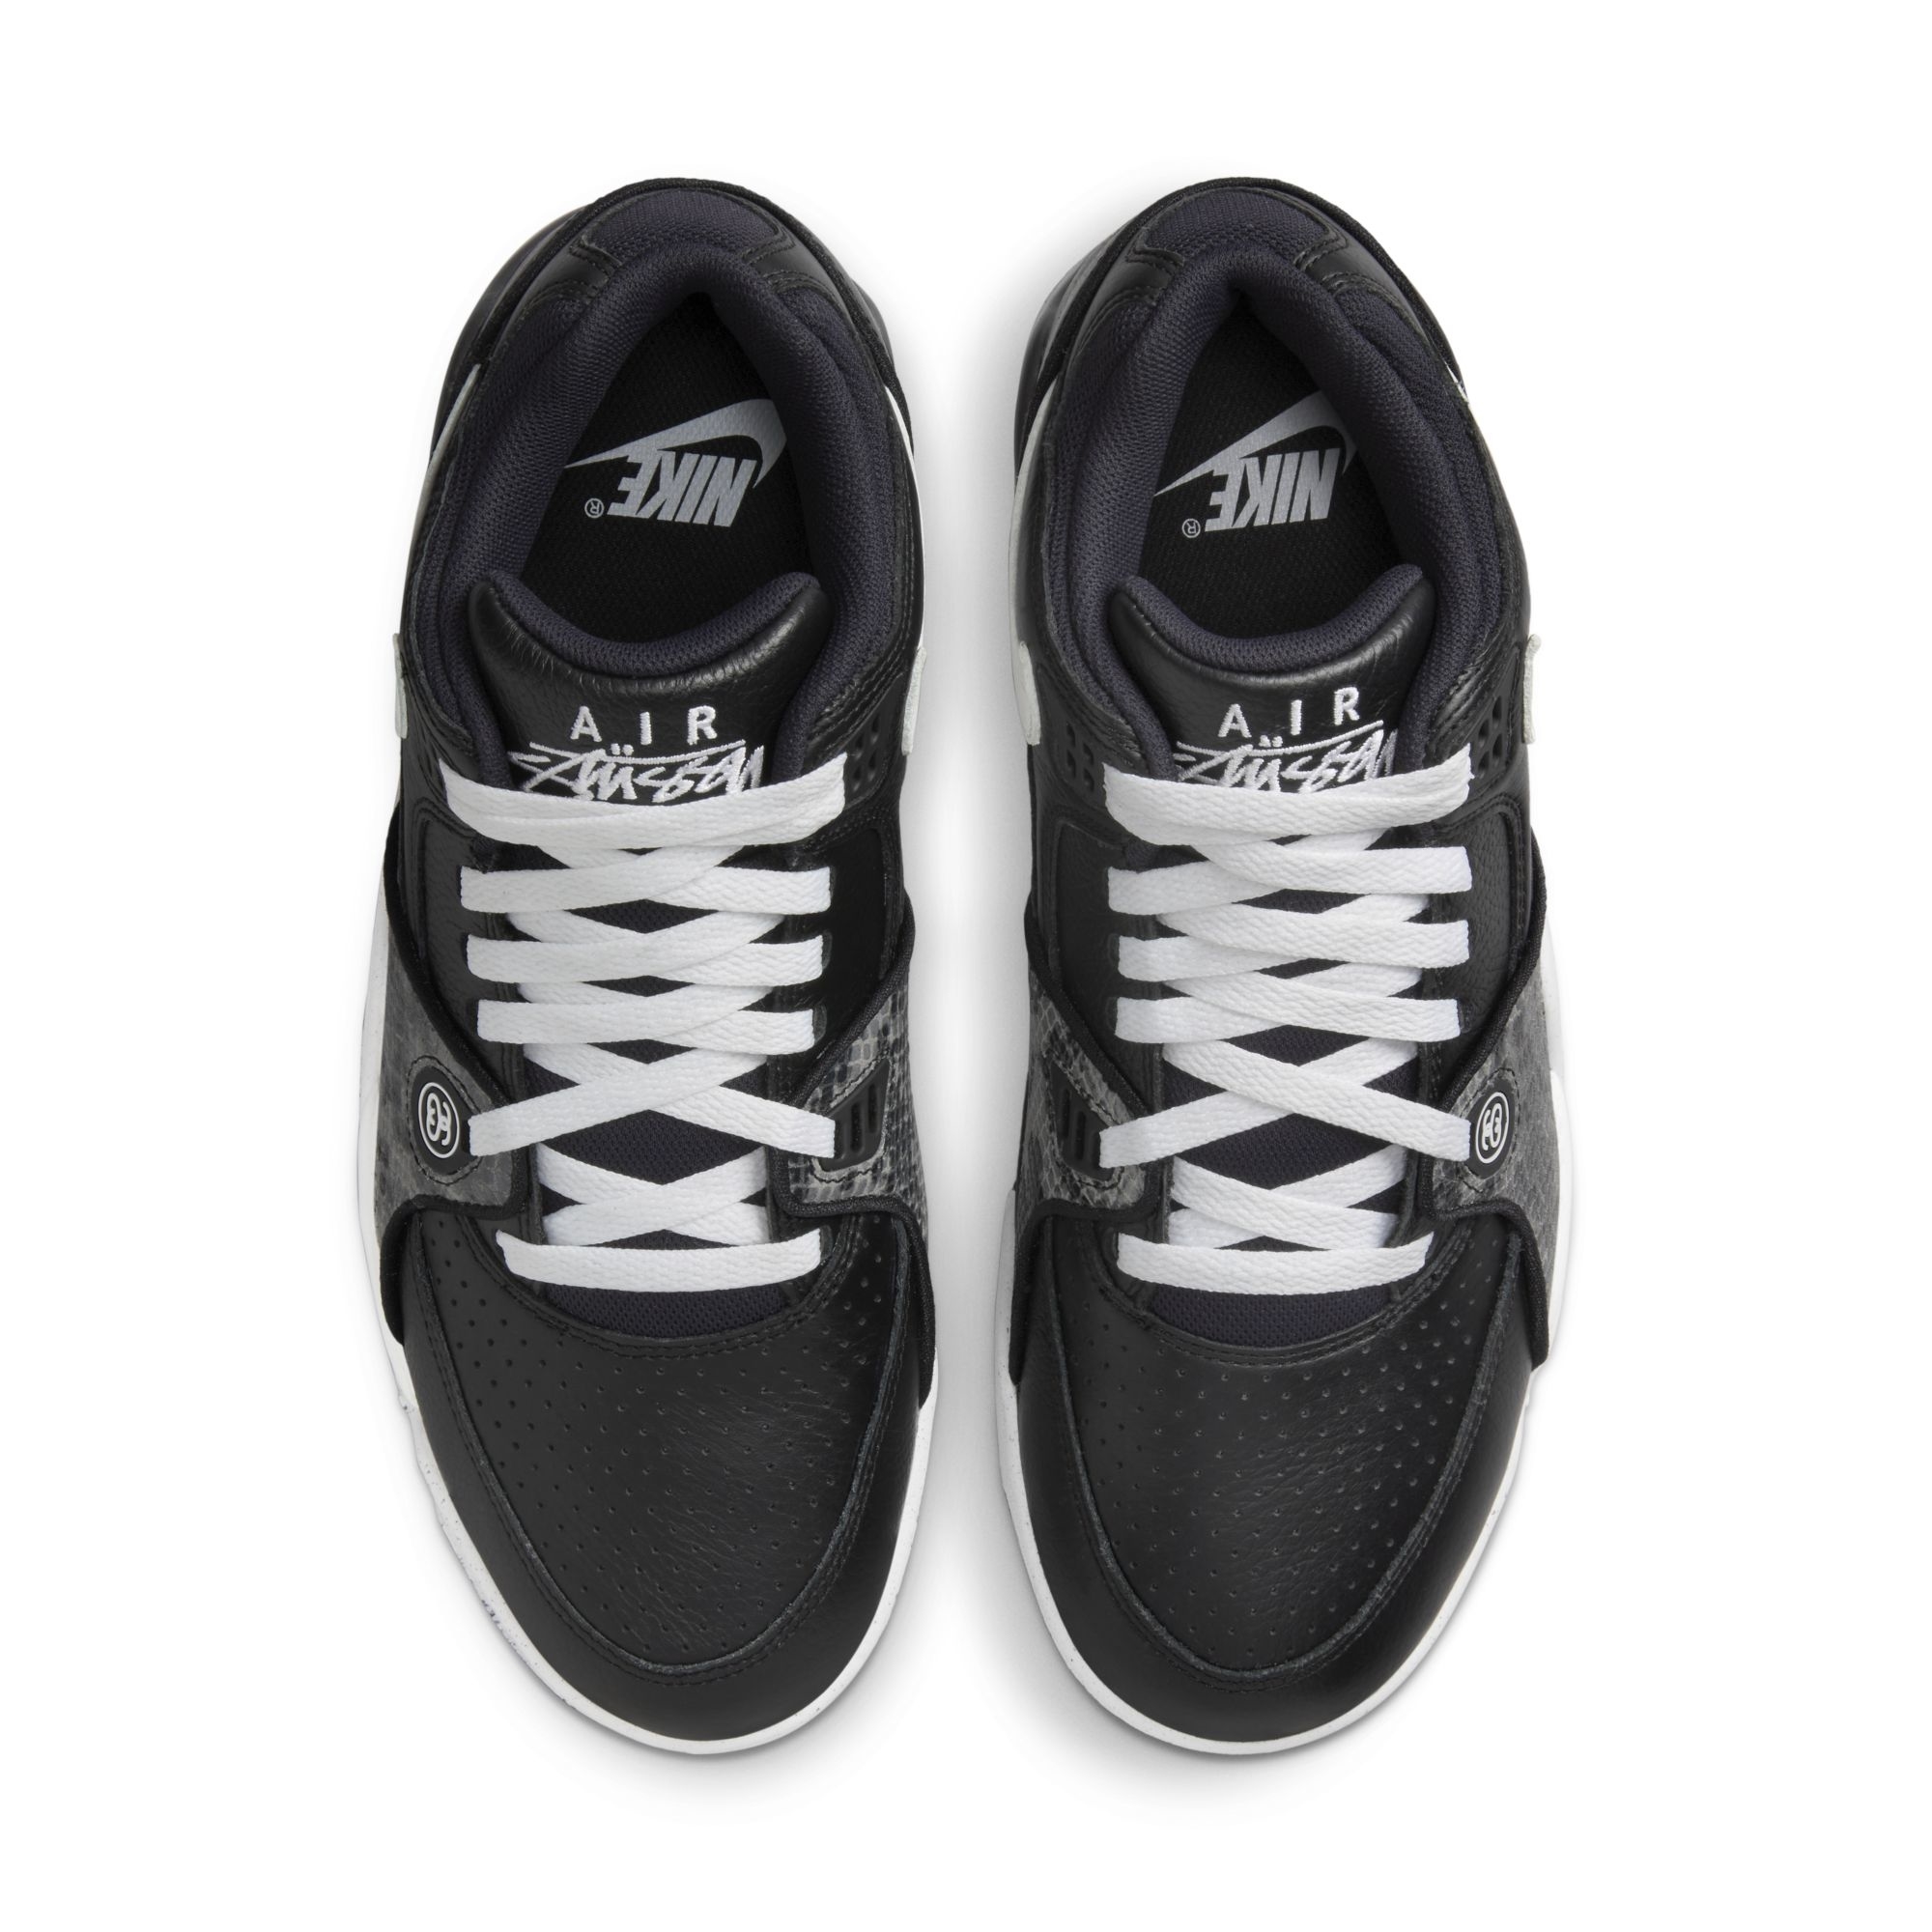 Stussy x Nike Air Flight 89 Collab Release Date | Complex